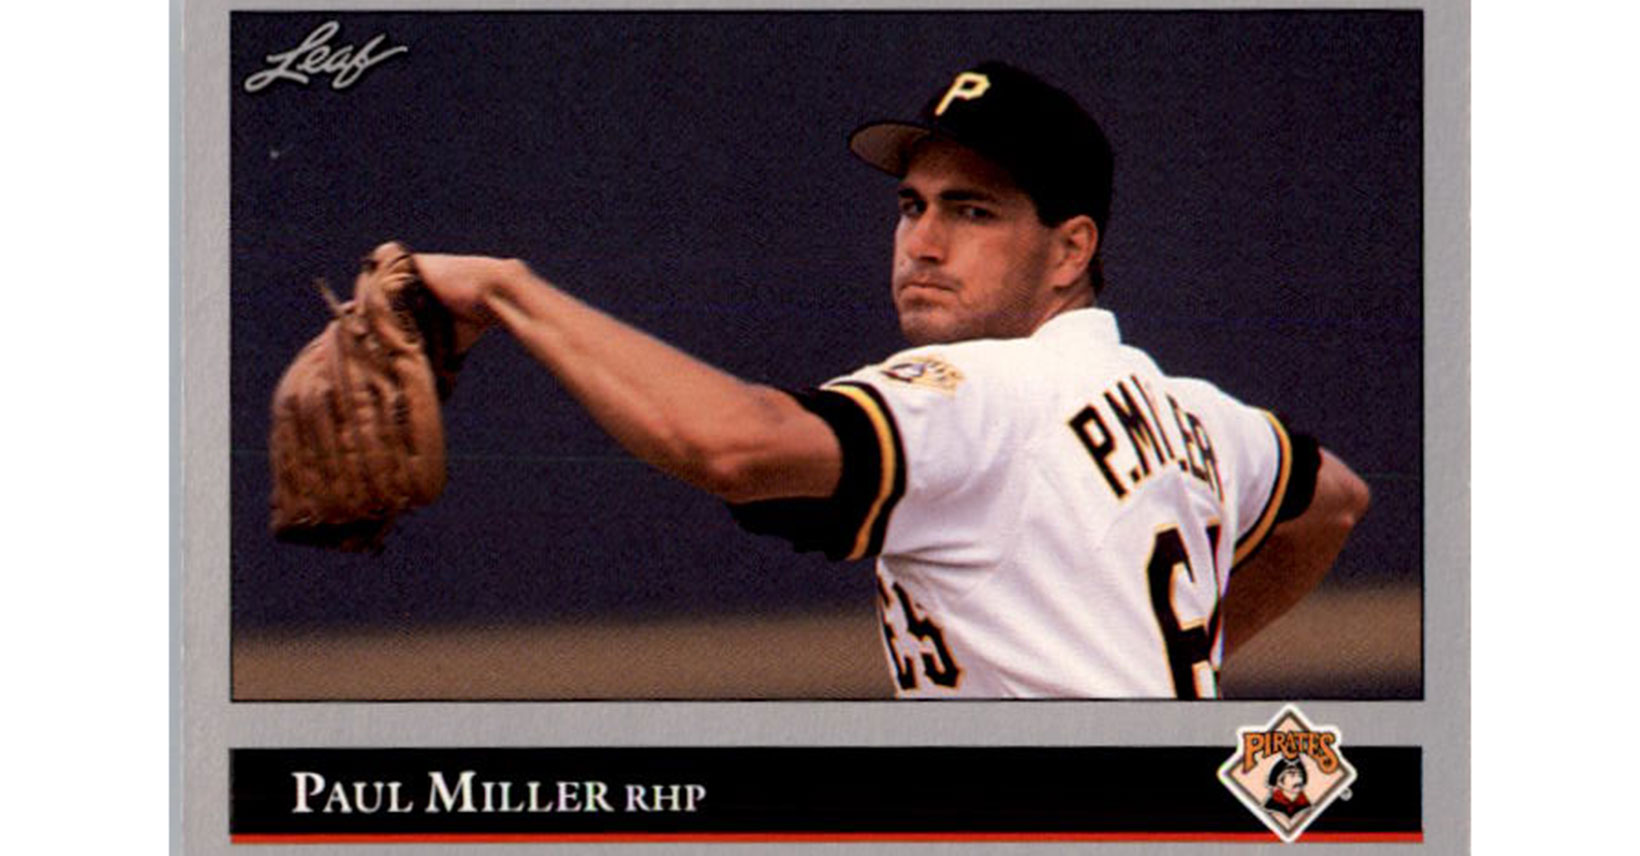 Paul Miller made his MLB debut with the Pittsburgh Pirates in 1991 